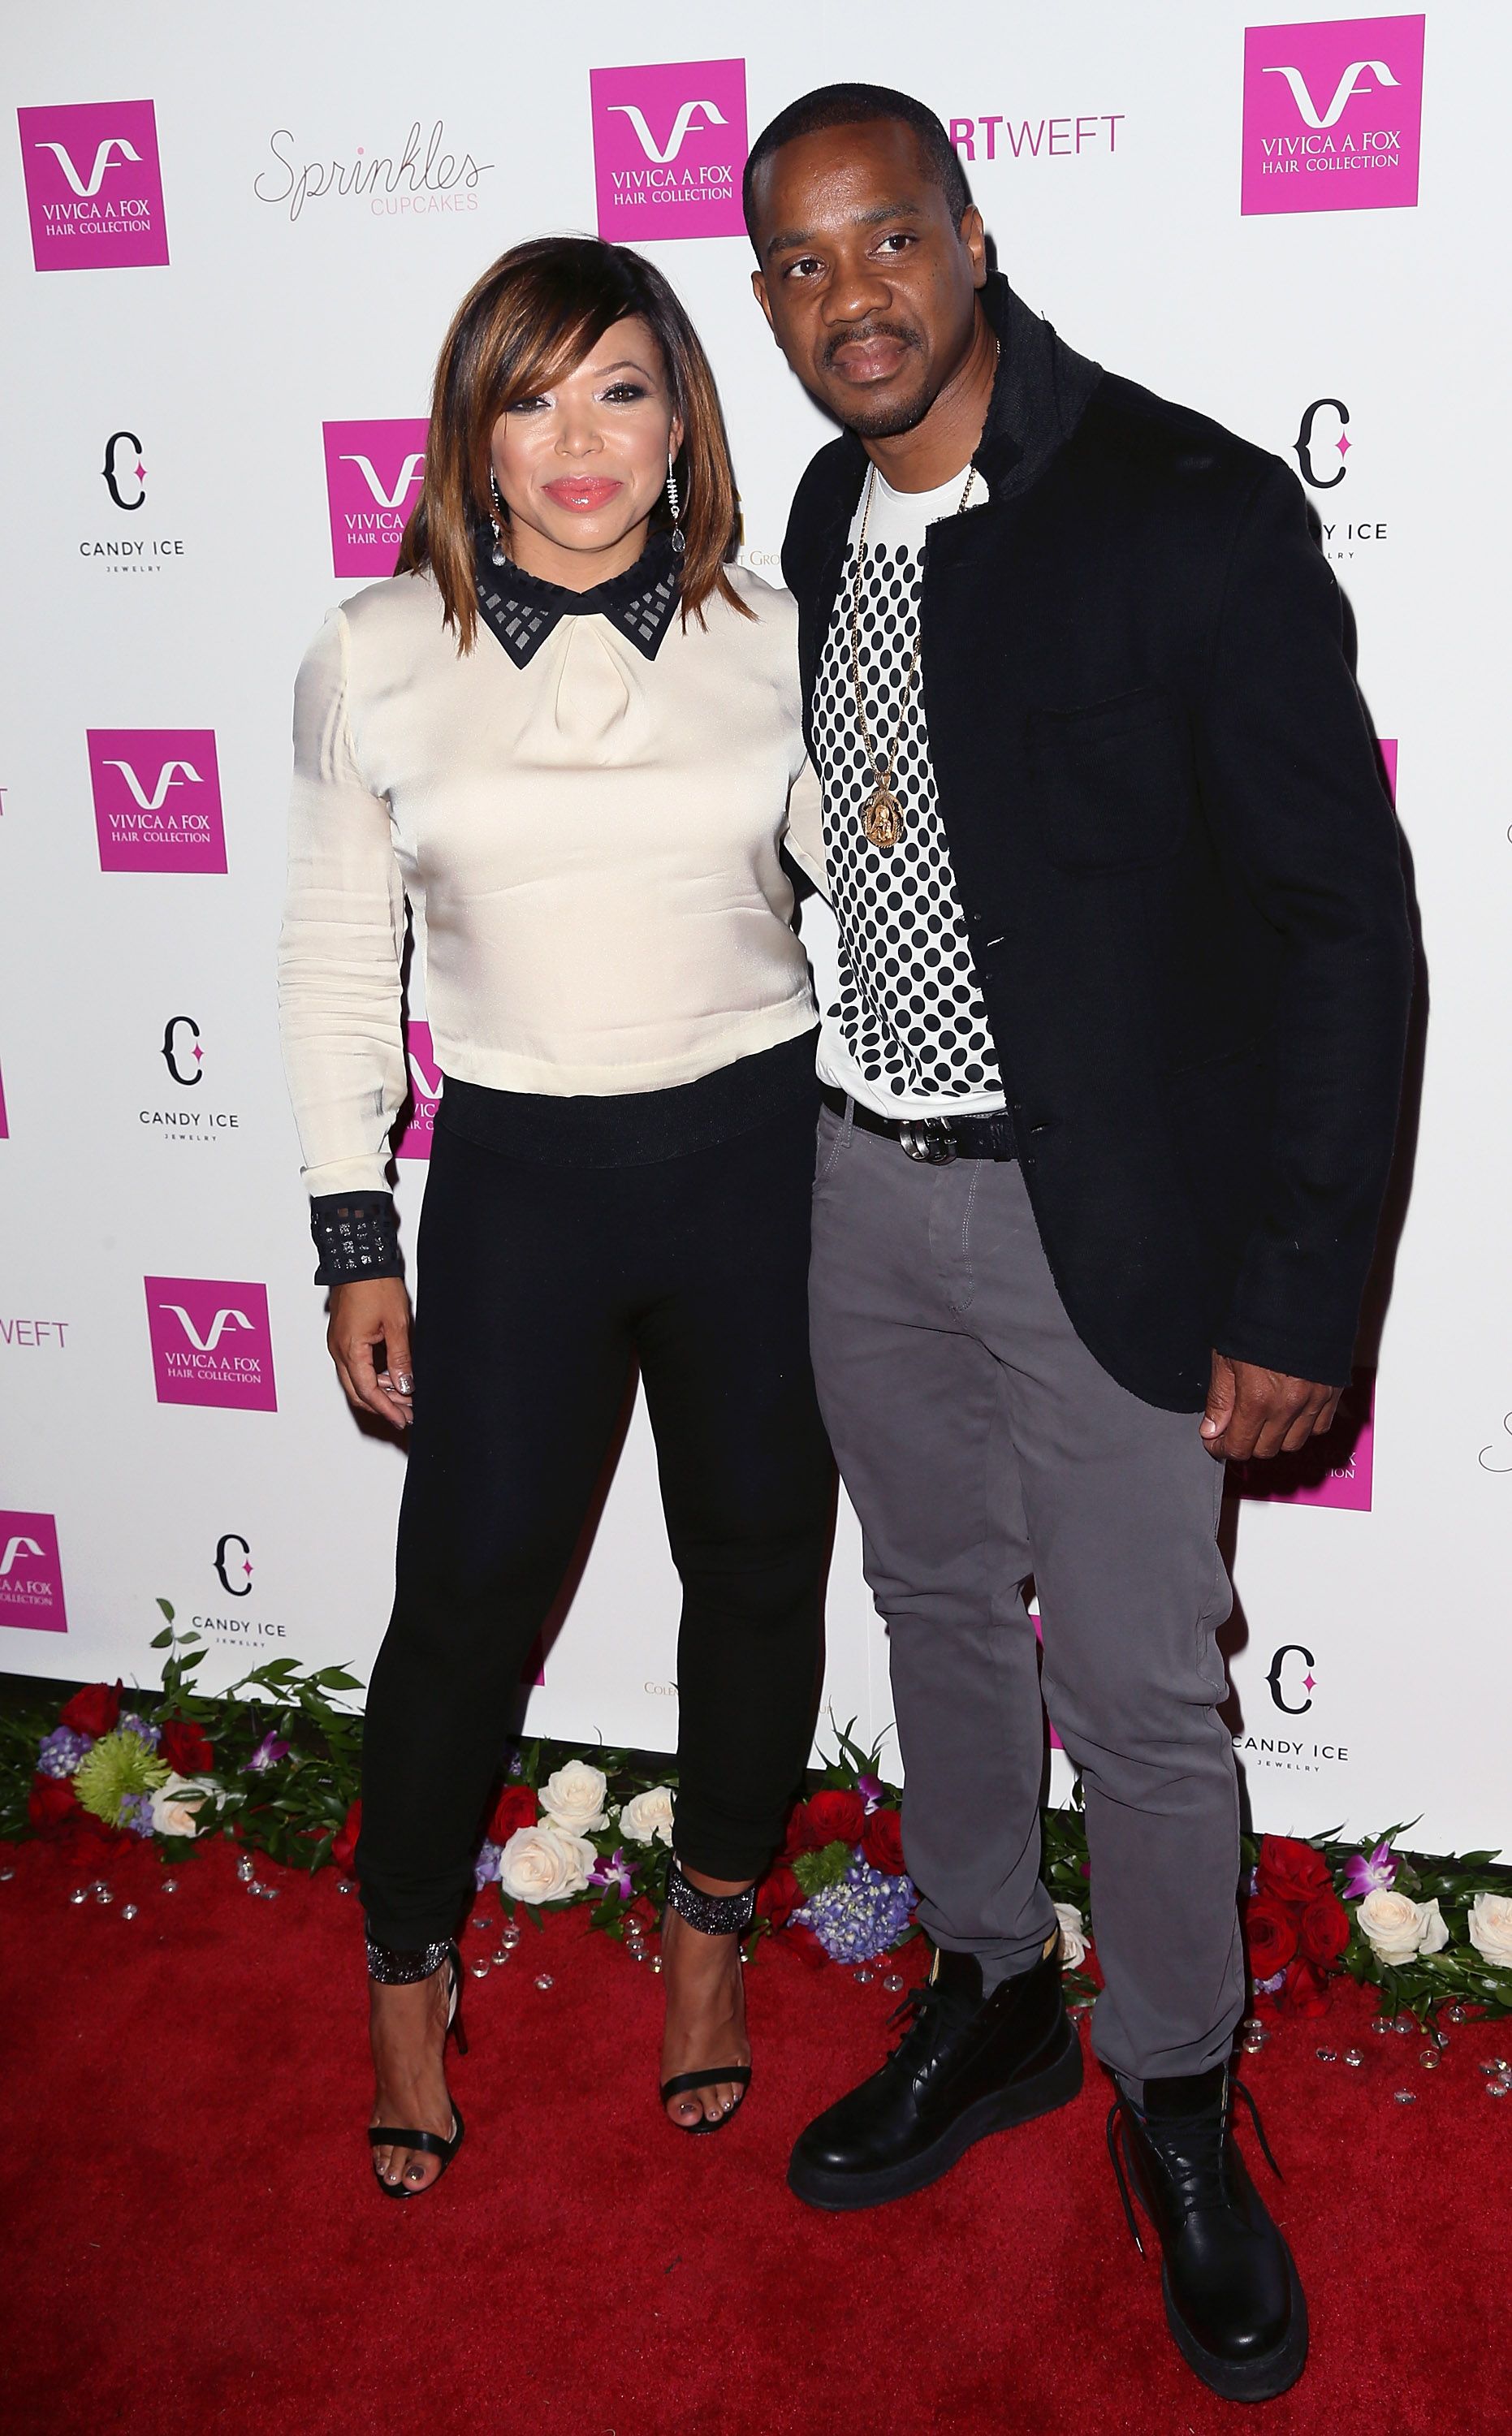 Tisha Campbell-Martin and Duane Martin at Vivica A. Fox's 50th birthday celebration at Philippe Chow on August 2, 2014 | Photo: Getty Images